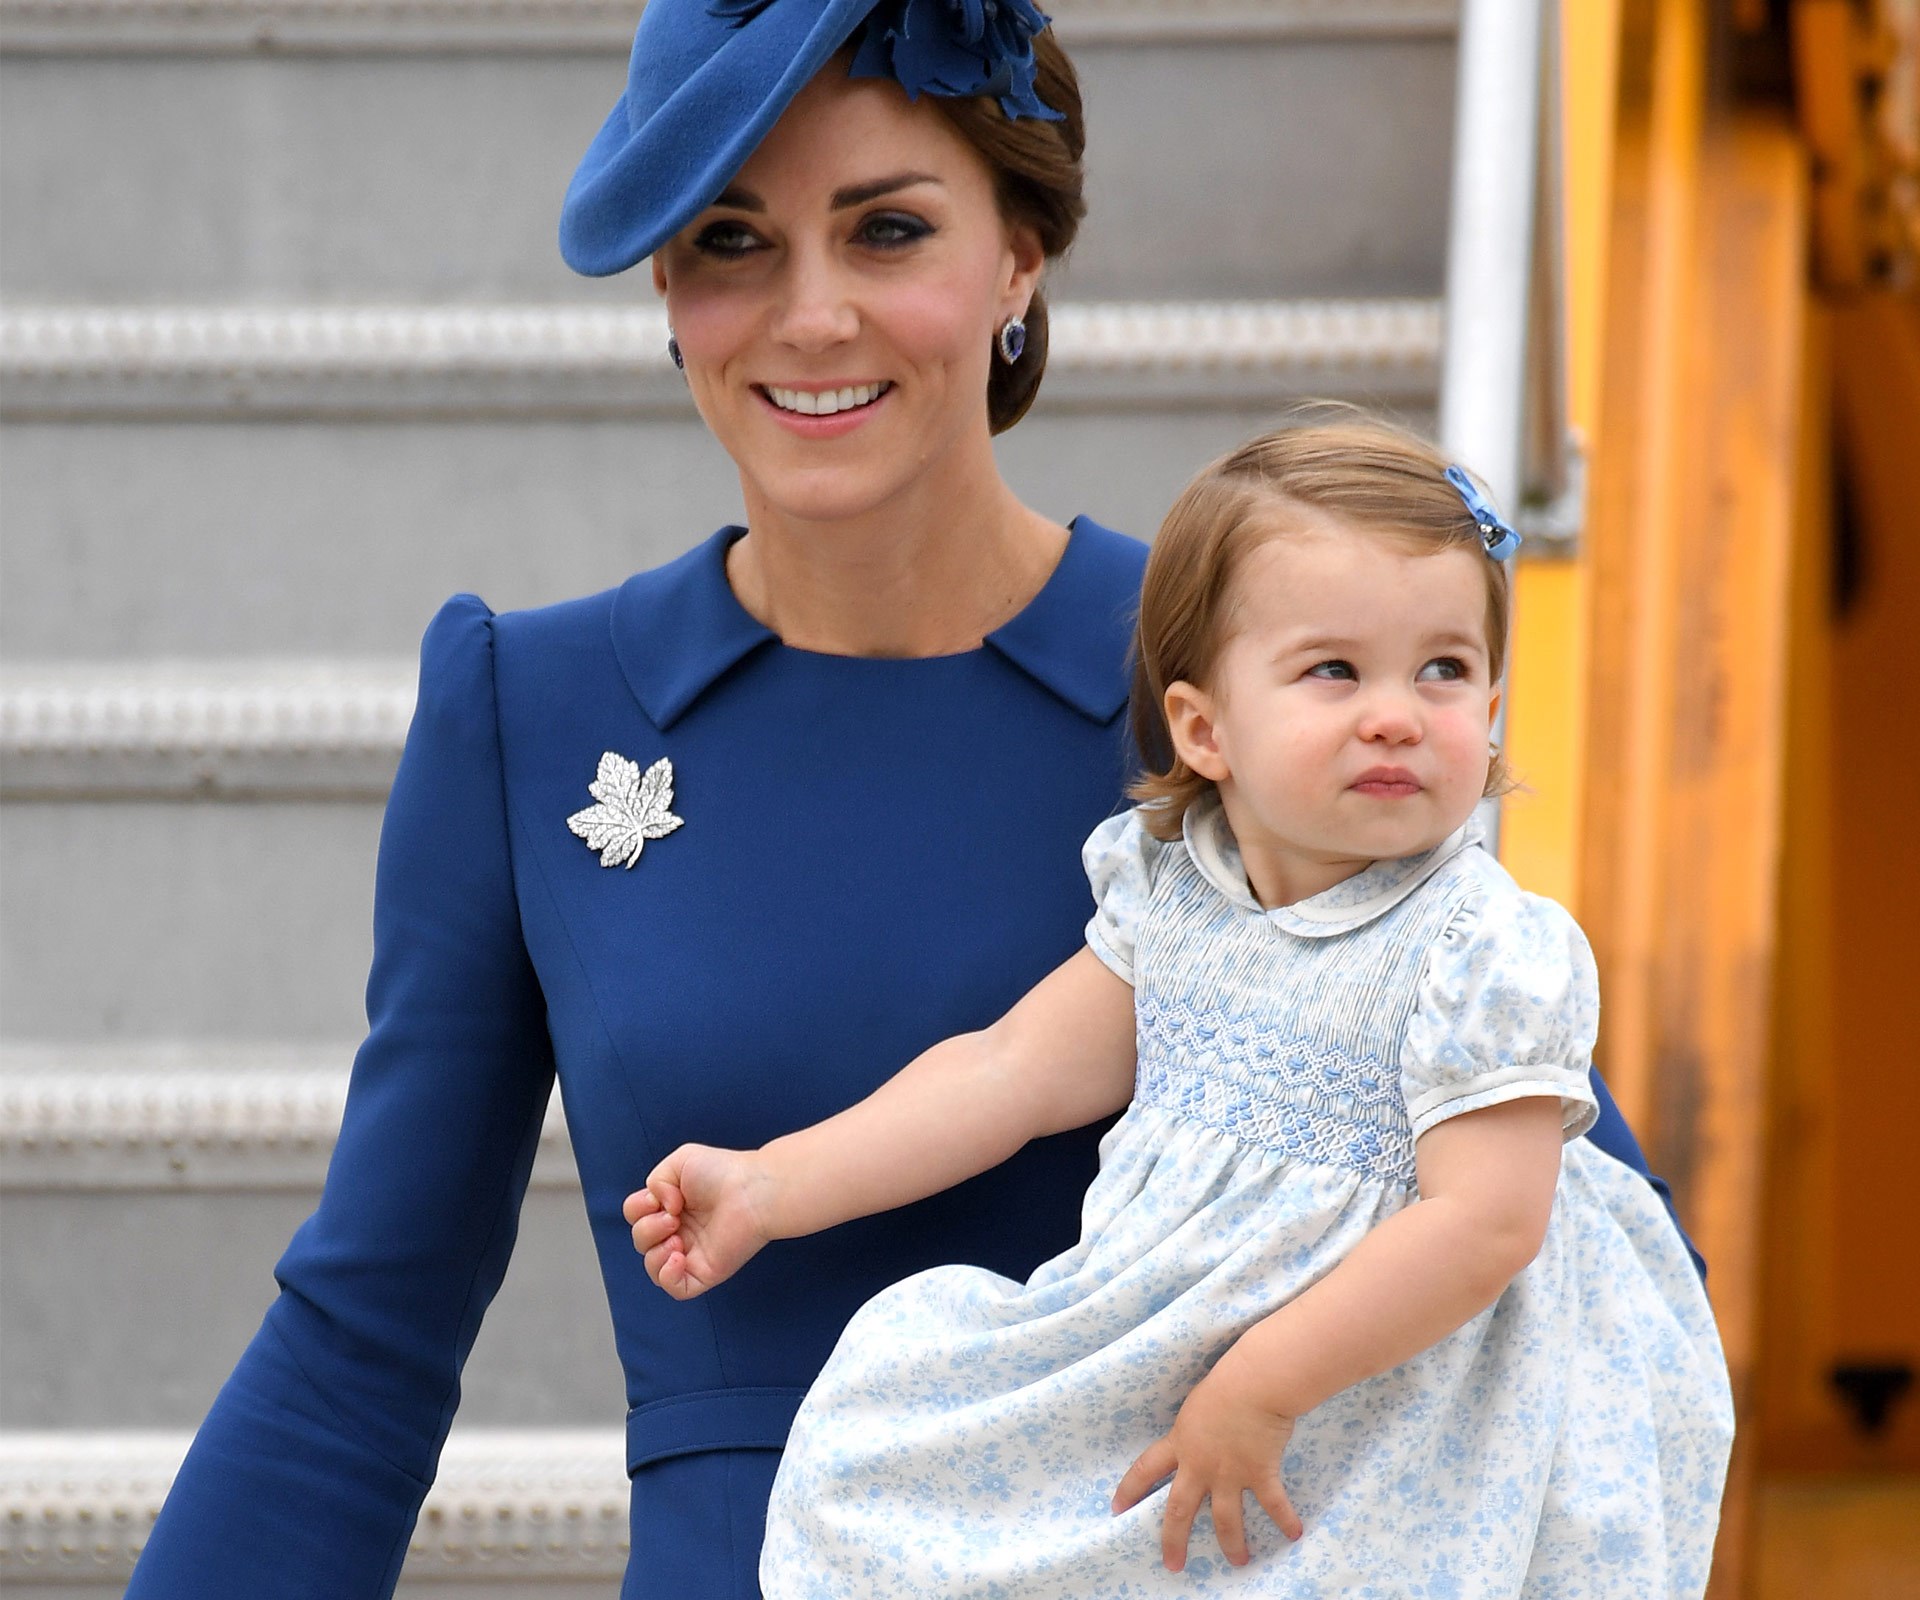 The Duchess of Cambridge with her adorably chubby-cheeked daughter, Charlotte.